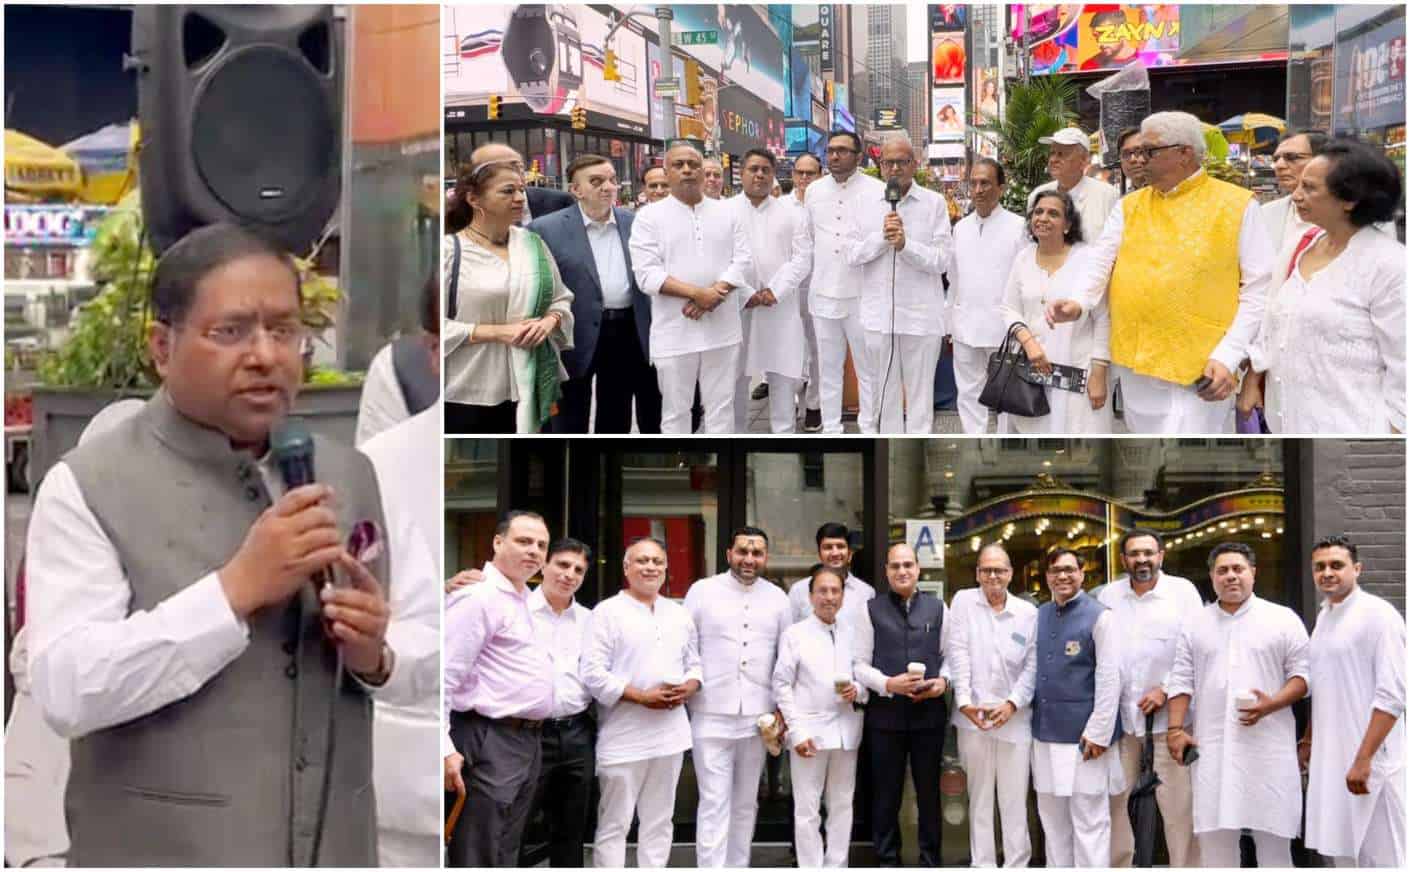 Indian-American Community Commemorates 9/11 At Times Square